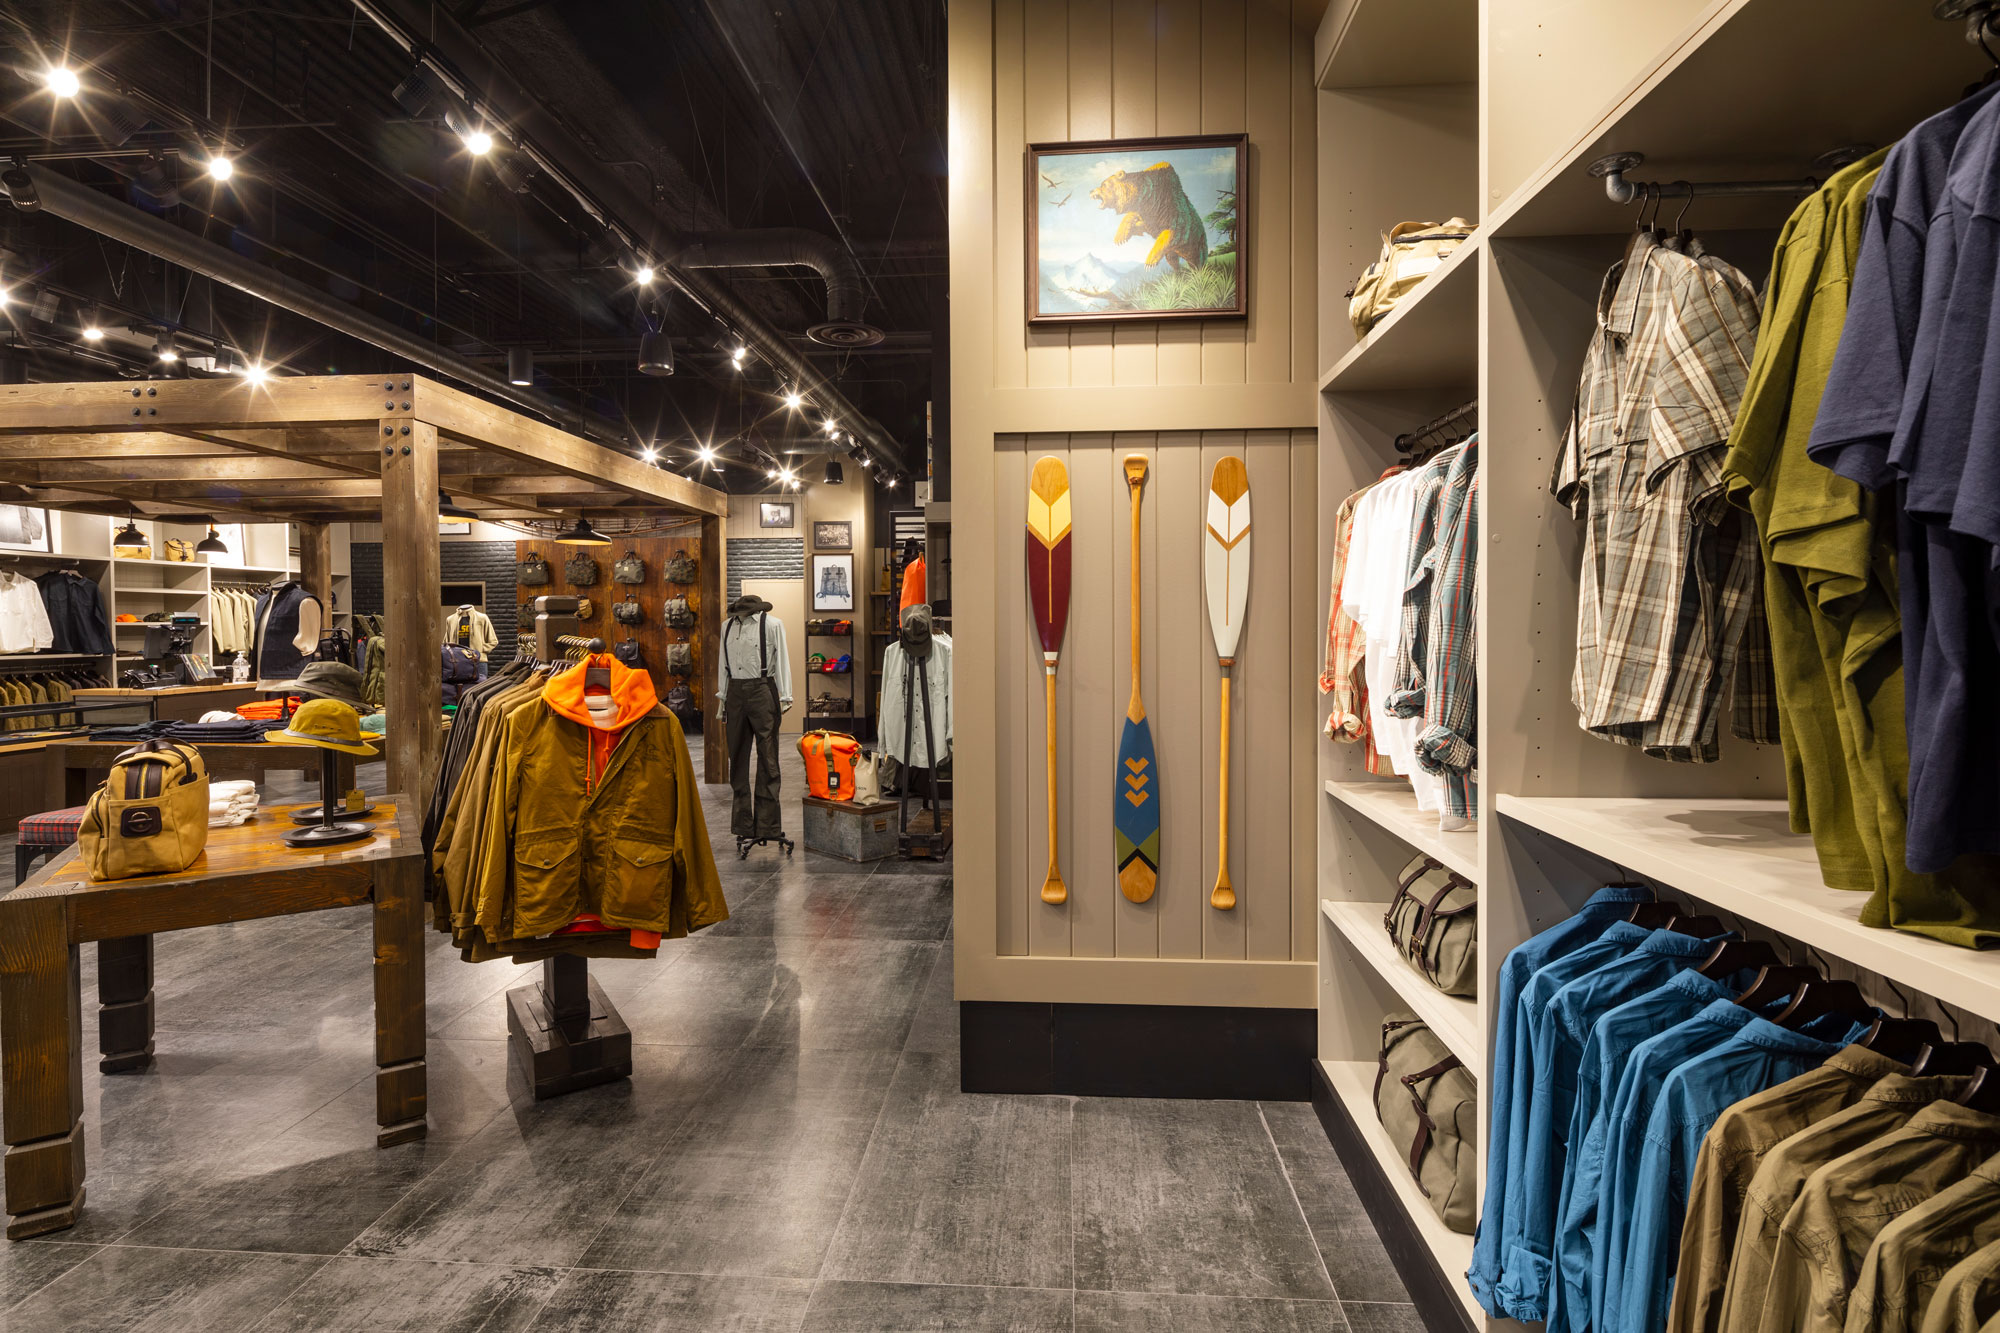 Filson interior with clothing merchandise